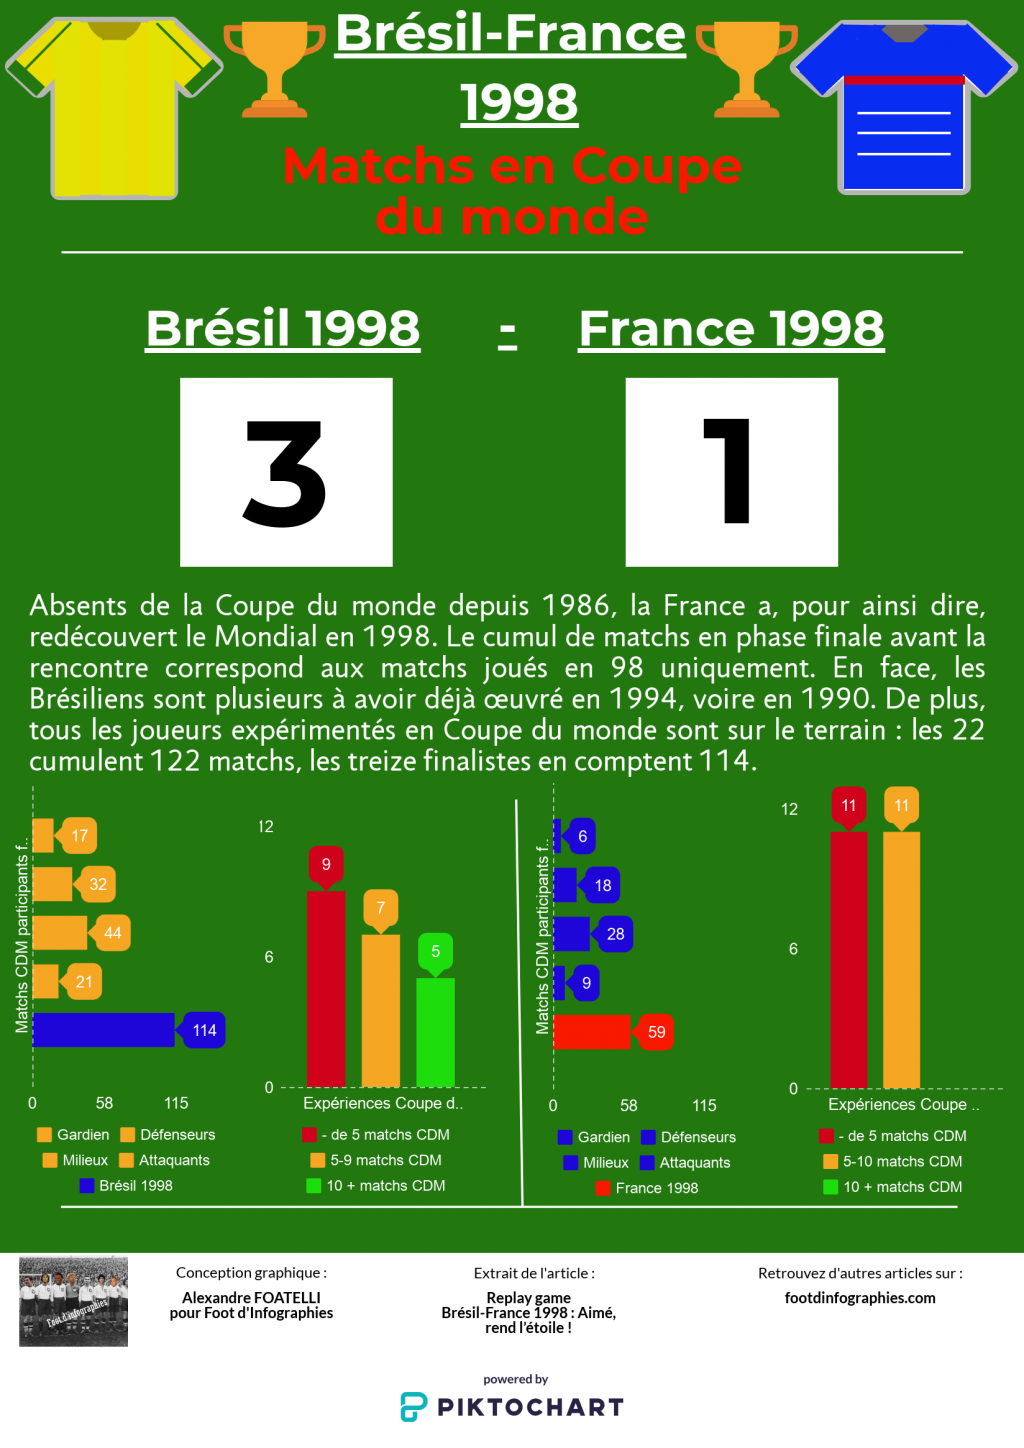 replay-game-bresil-france-1998-matchs-en-coupe-du-monde-foot-dinfographies